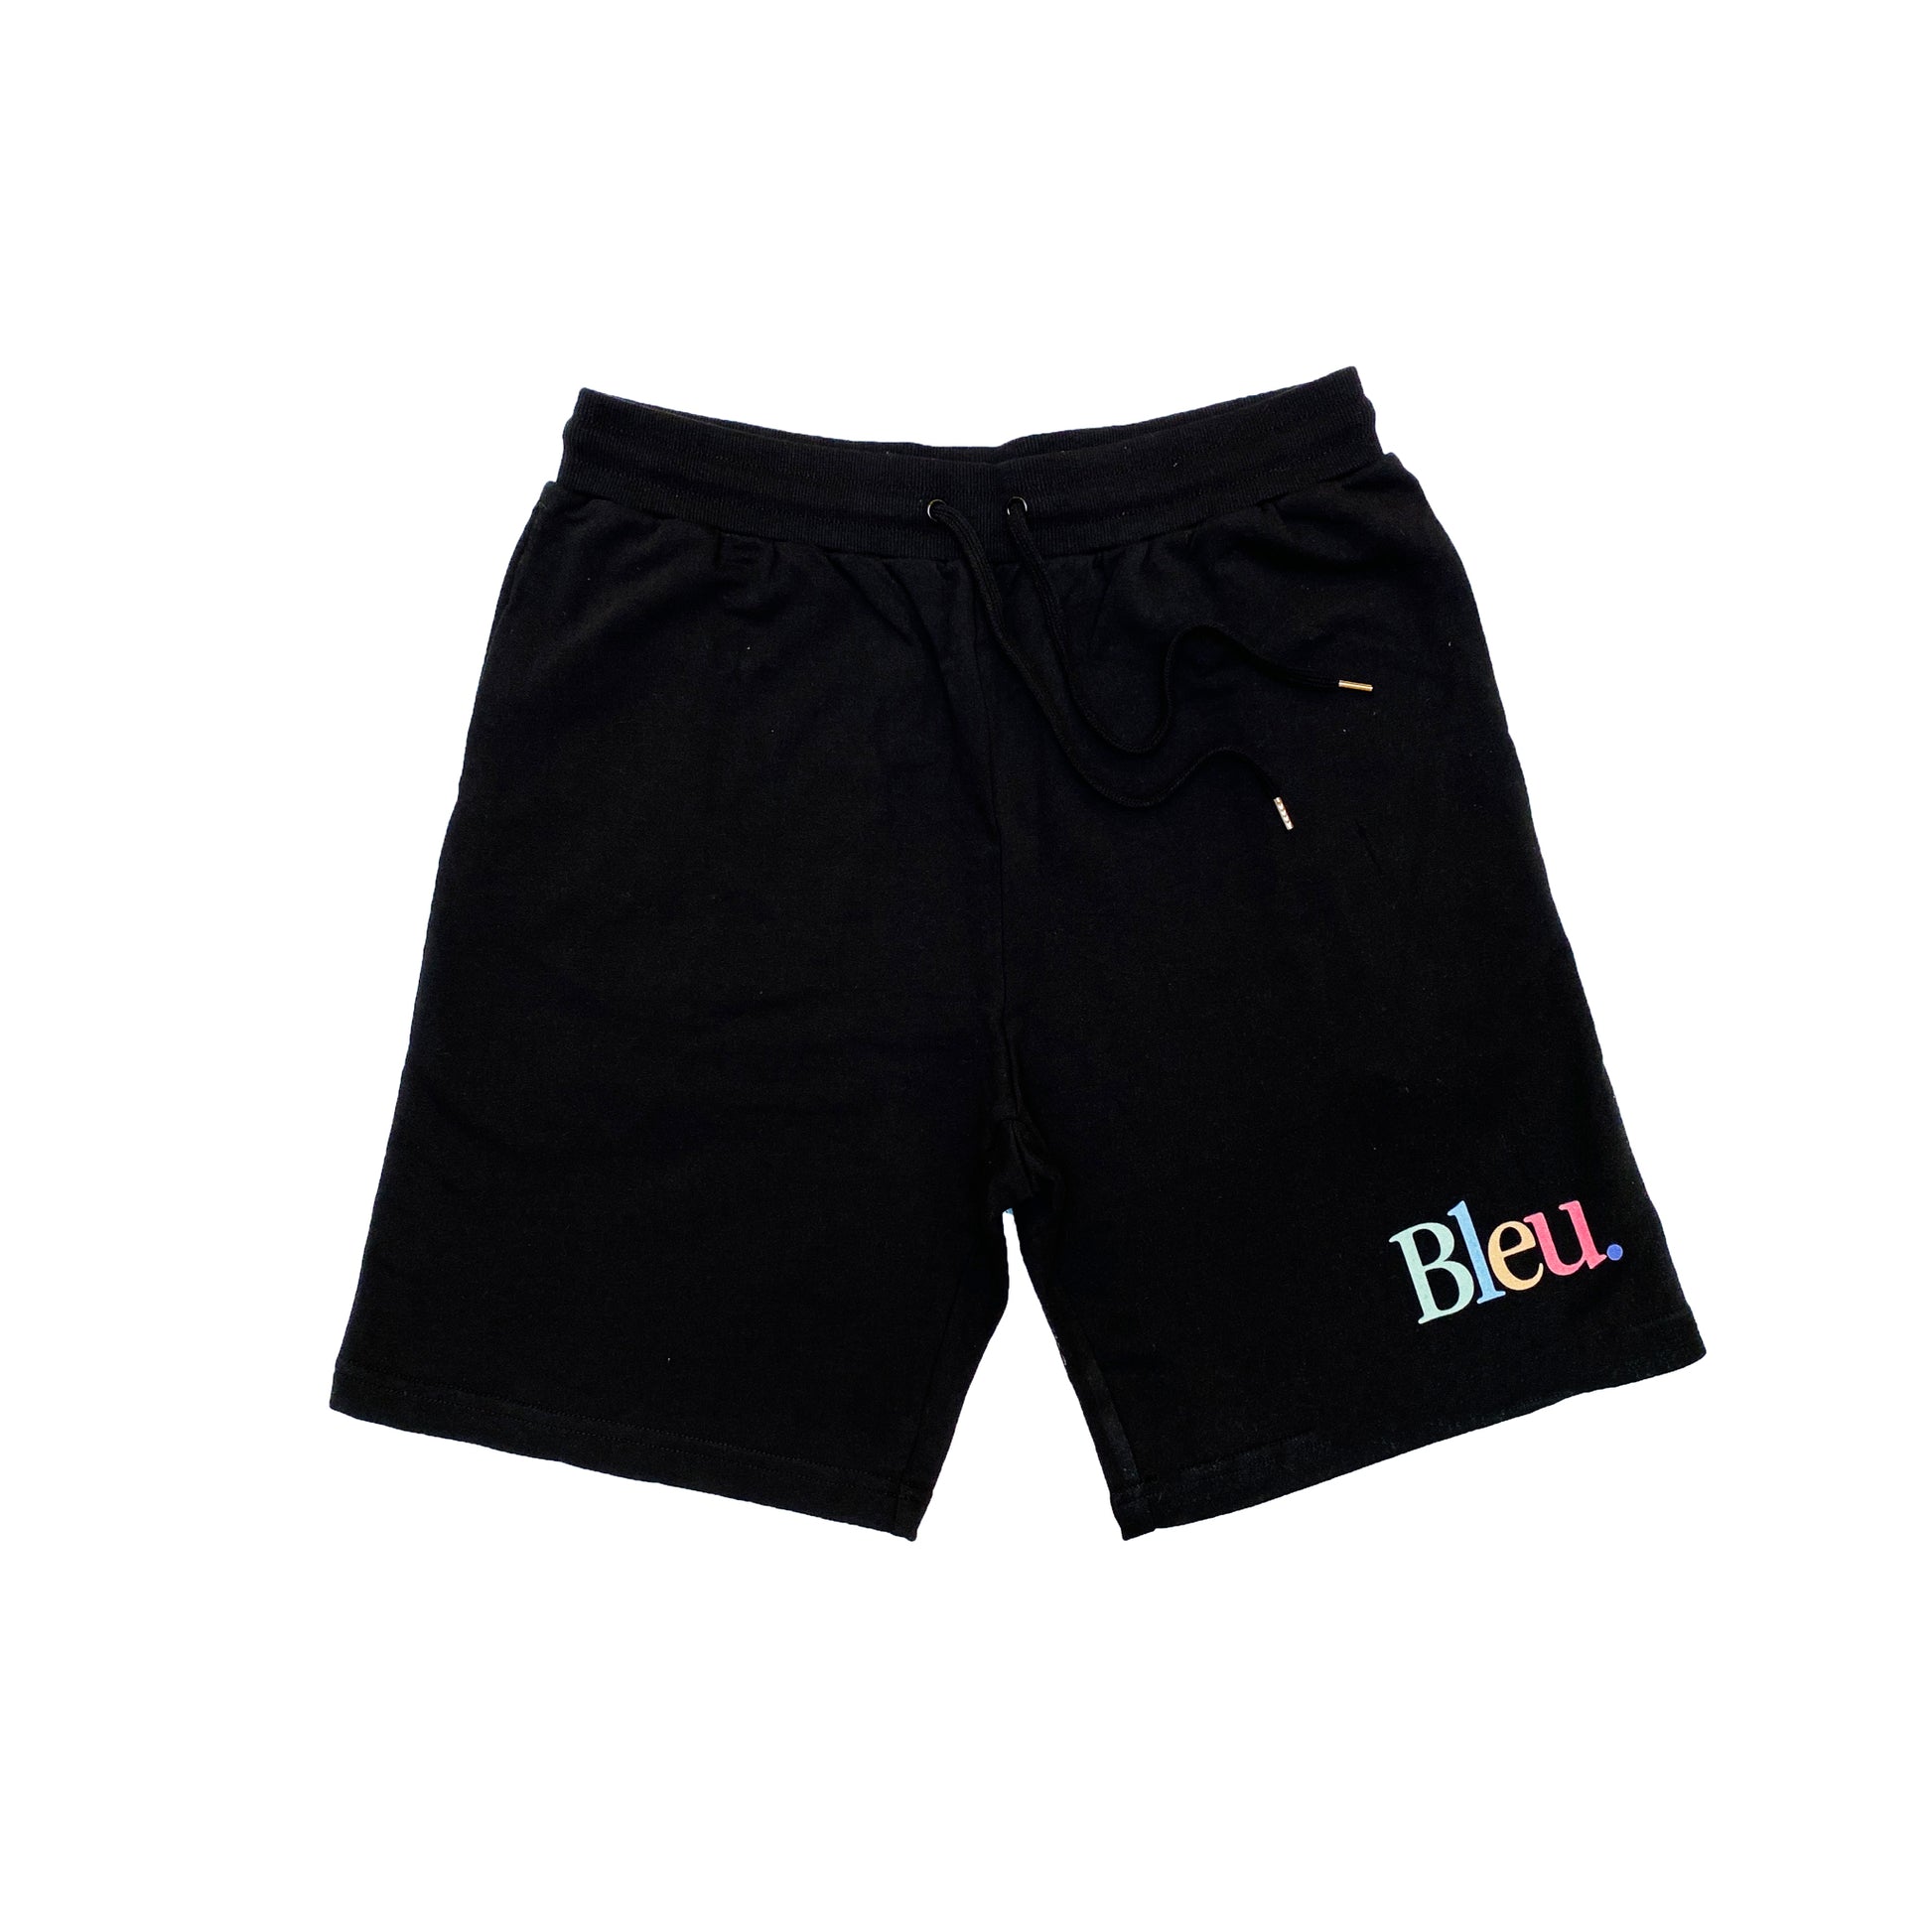 Regular fit Sweat shorts Mid weight, 100% cotton DTG printed logo Back woven tag 